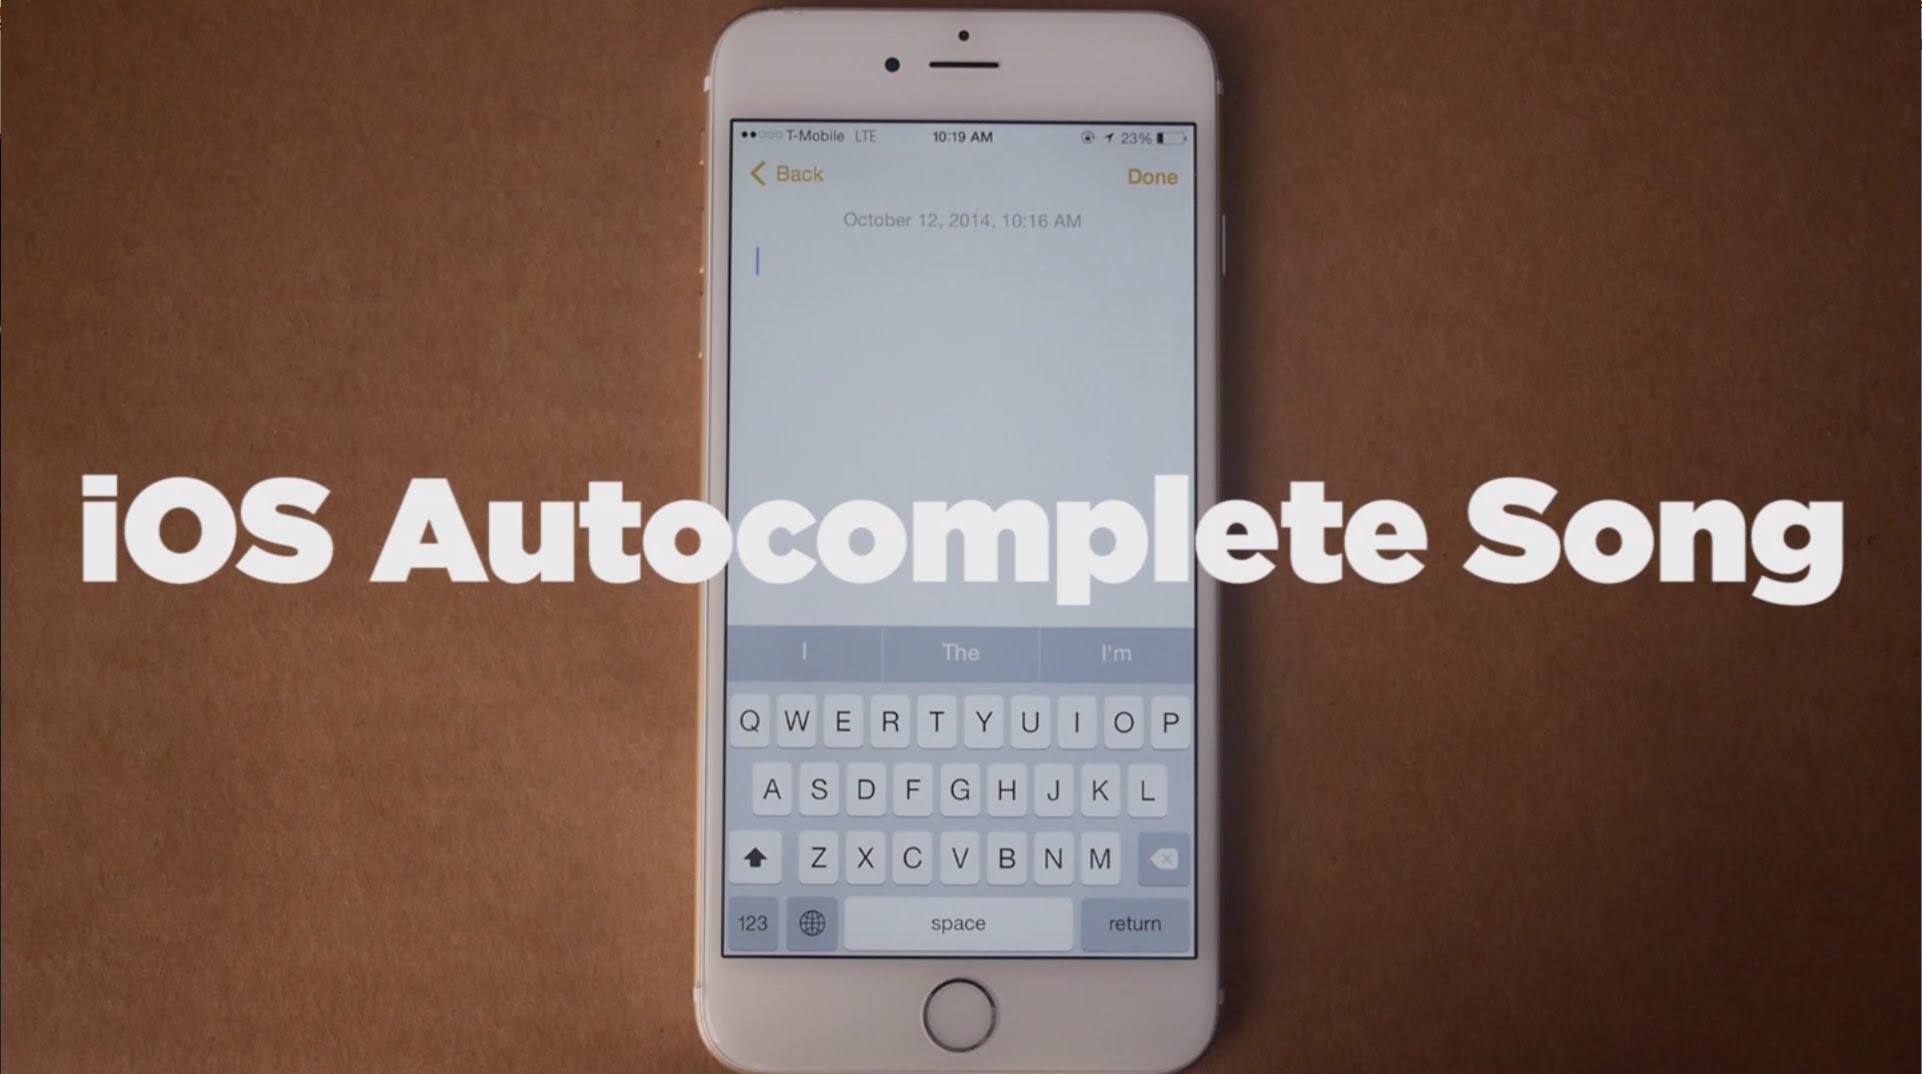 iPhone 6 als Songwriter? Der iOS 8 Autocomplete Song! (Video) 4